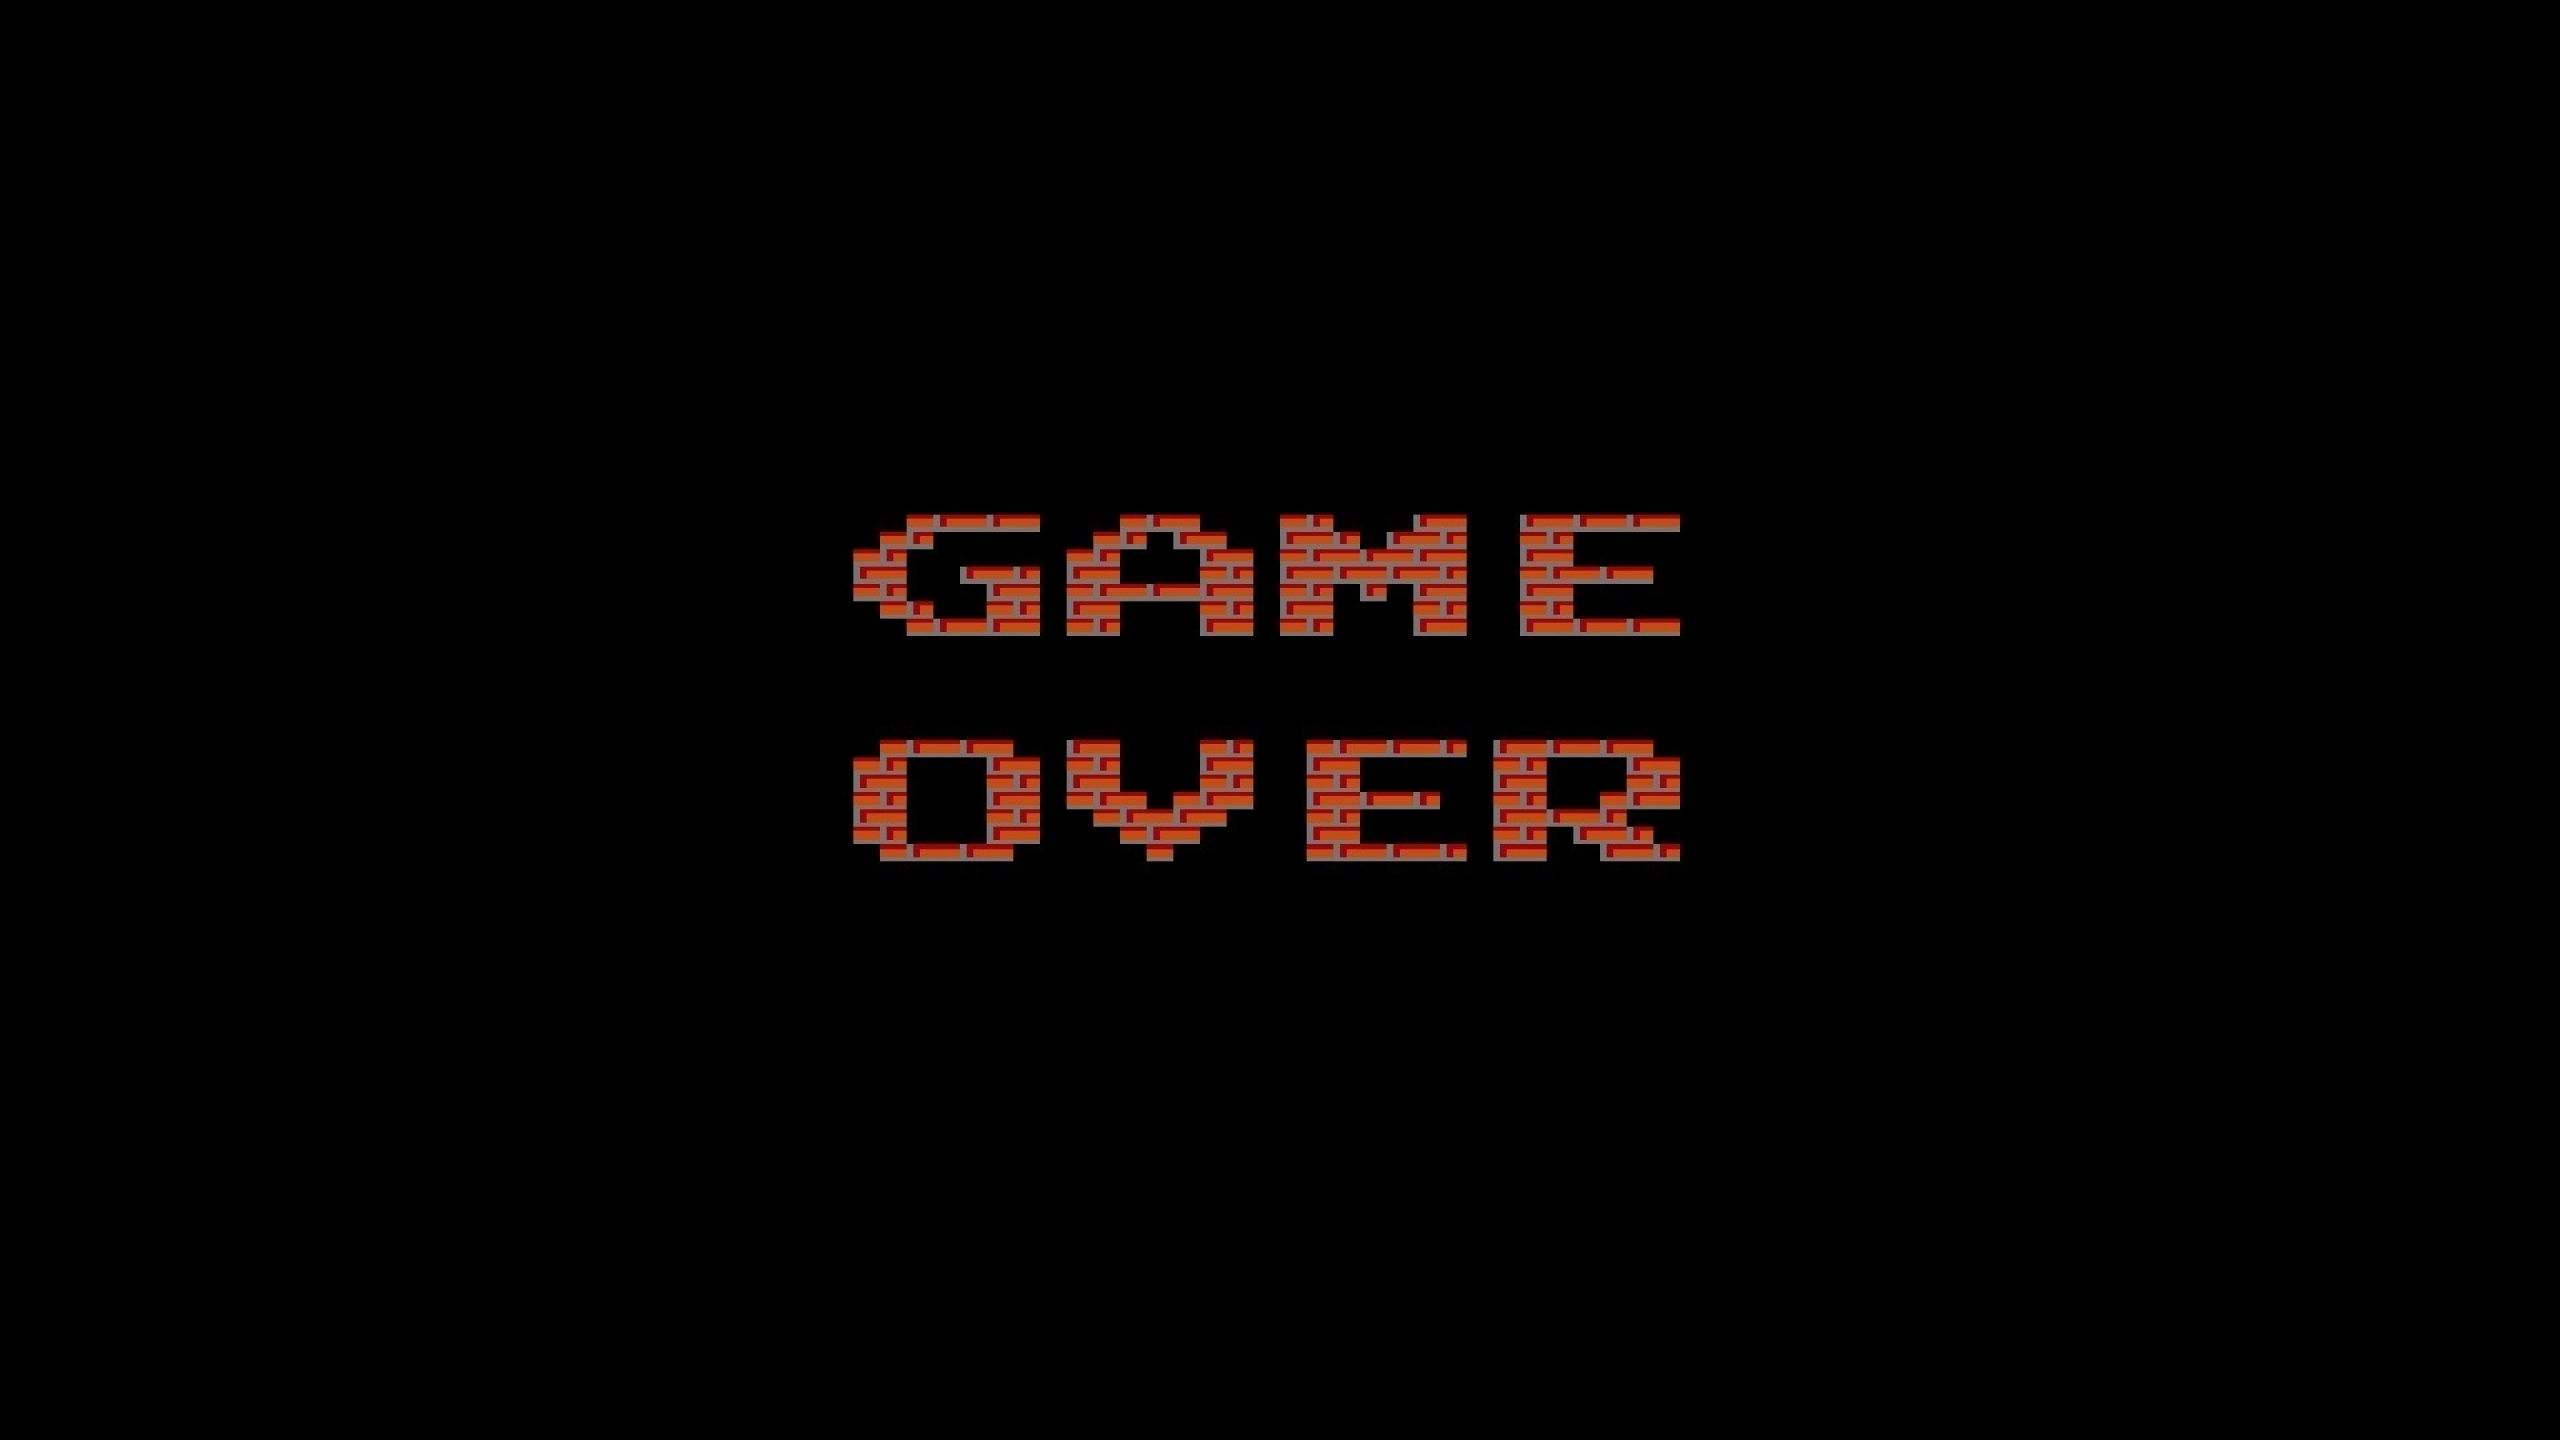 Game Over Wallpaper 71 pictures